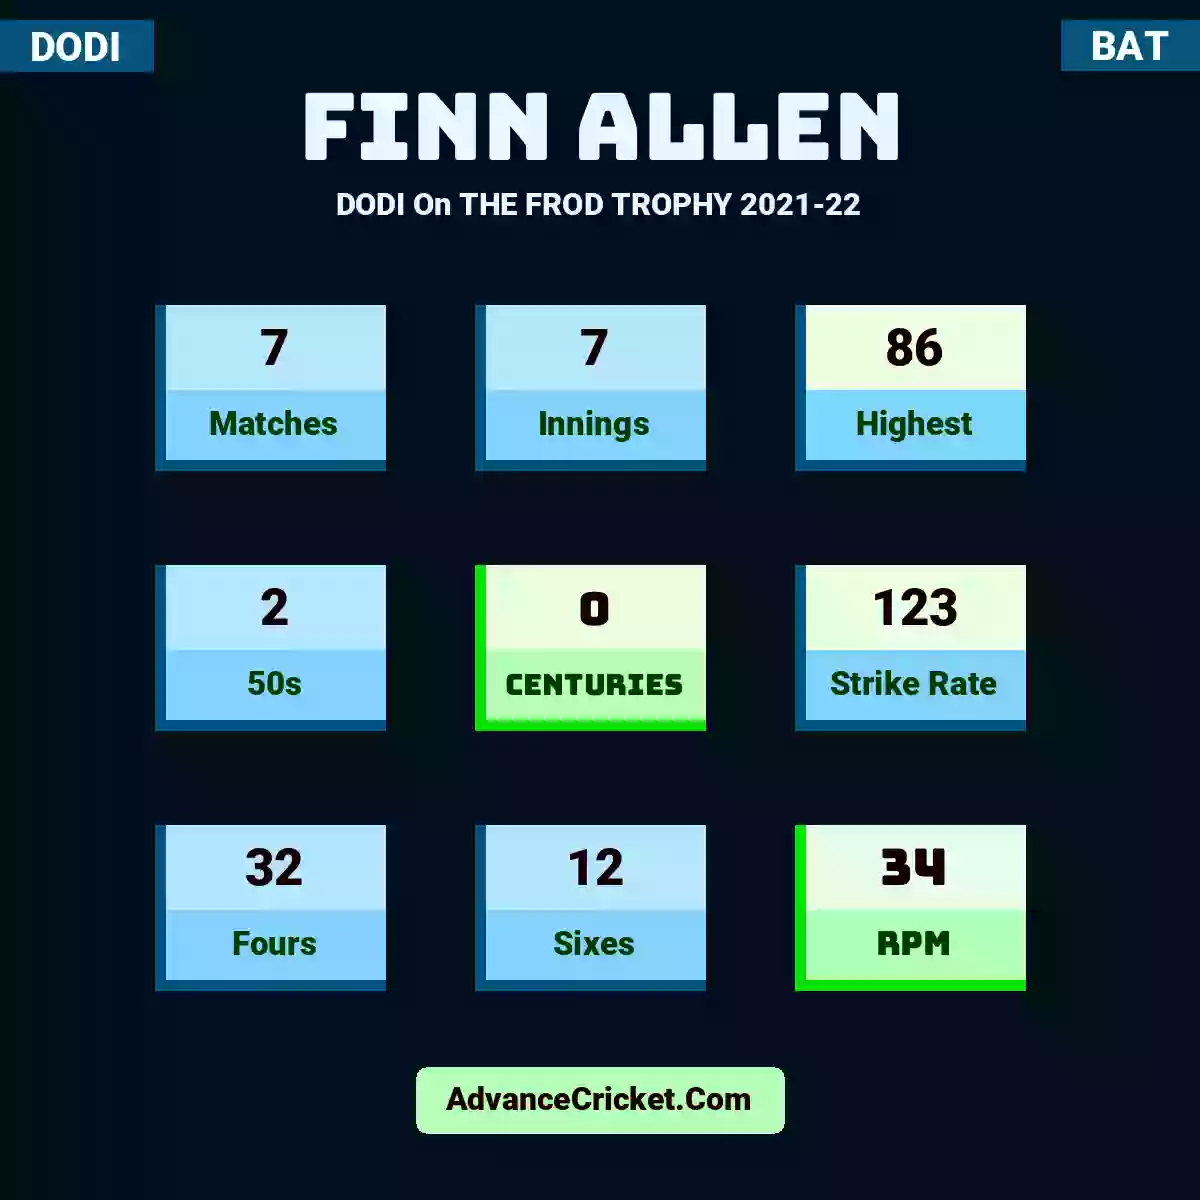 Finn Allen DODI  On THE FROD TROPHY 2021-22, Finn Allen played 7 matches, scored 86 runs as highest, 2 half-centuries, and 0 centuries, with a strike rate of 123. F.Allen hit 32 fours and 12 sixes, with an RPM of 34.